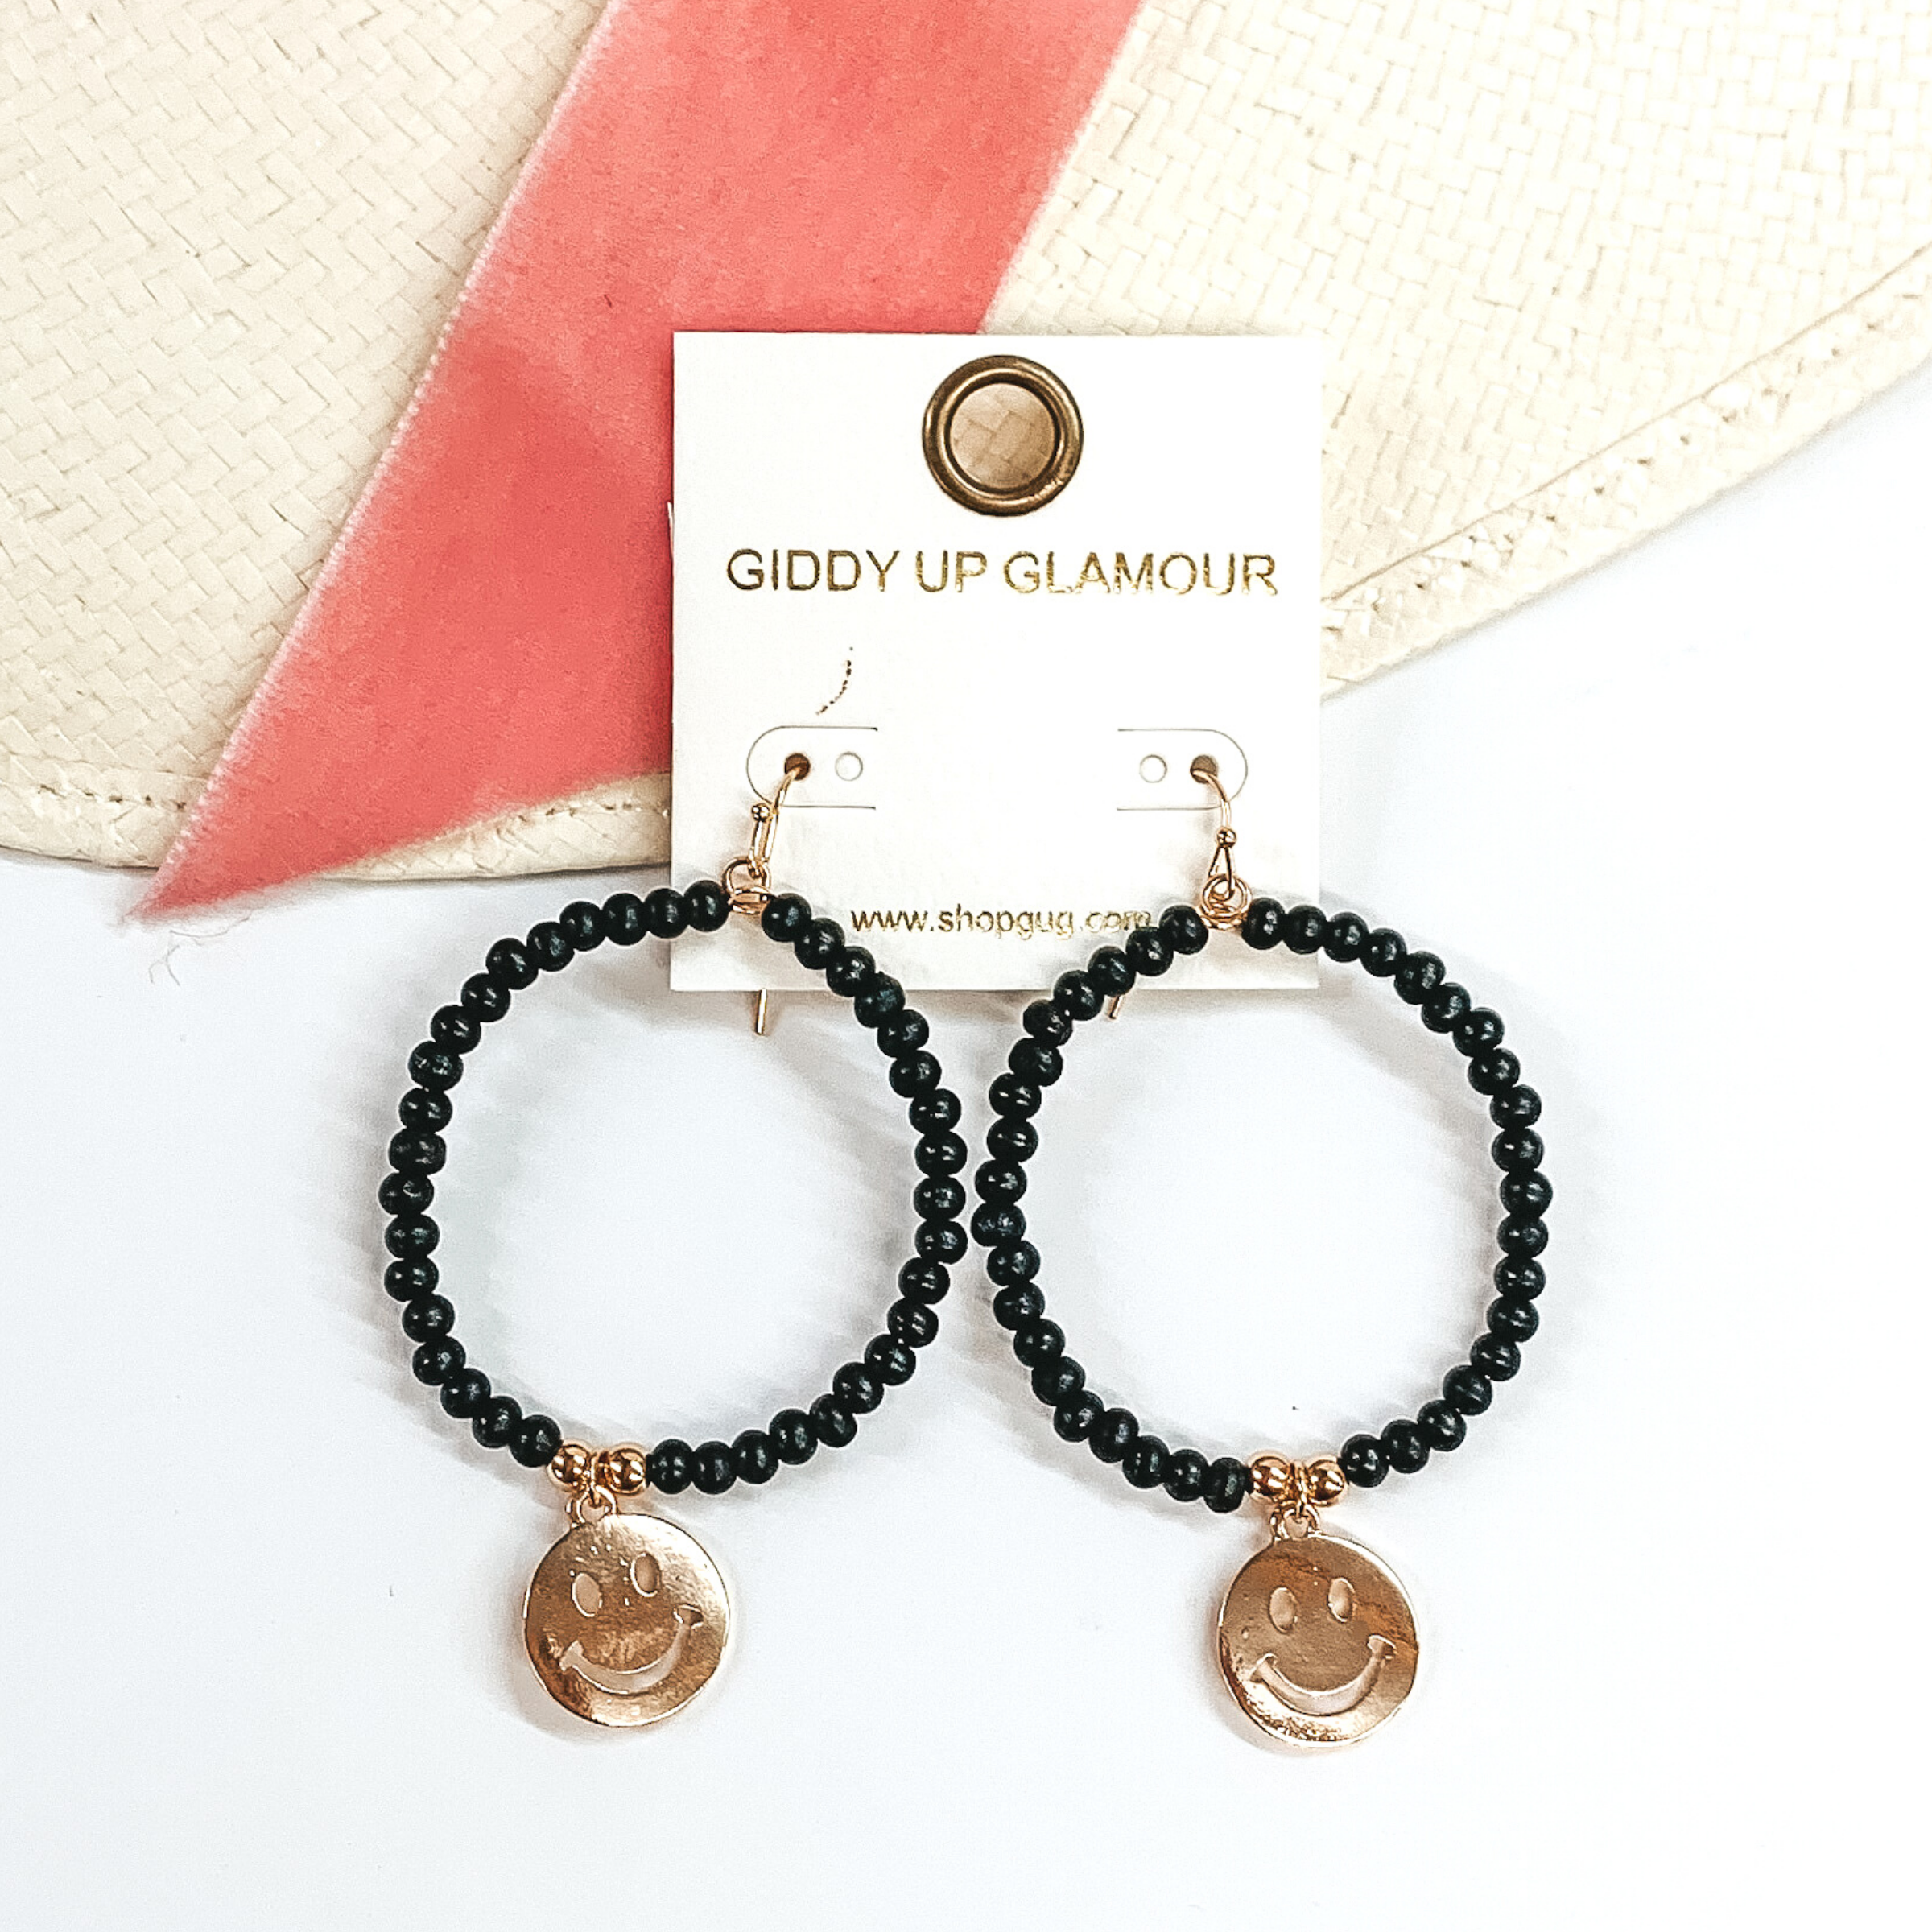 Circle drop earrings covered in black beads. These is a hanging smiley face charm in gold. These earrings are picture laying partially on a straw hat and pink velvet strip on a white background. 